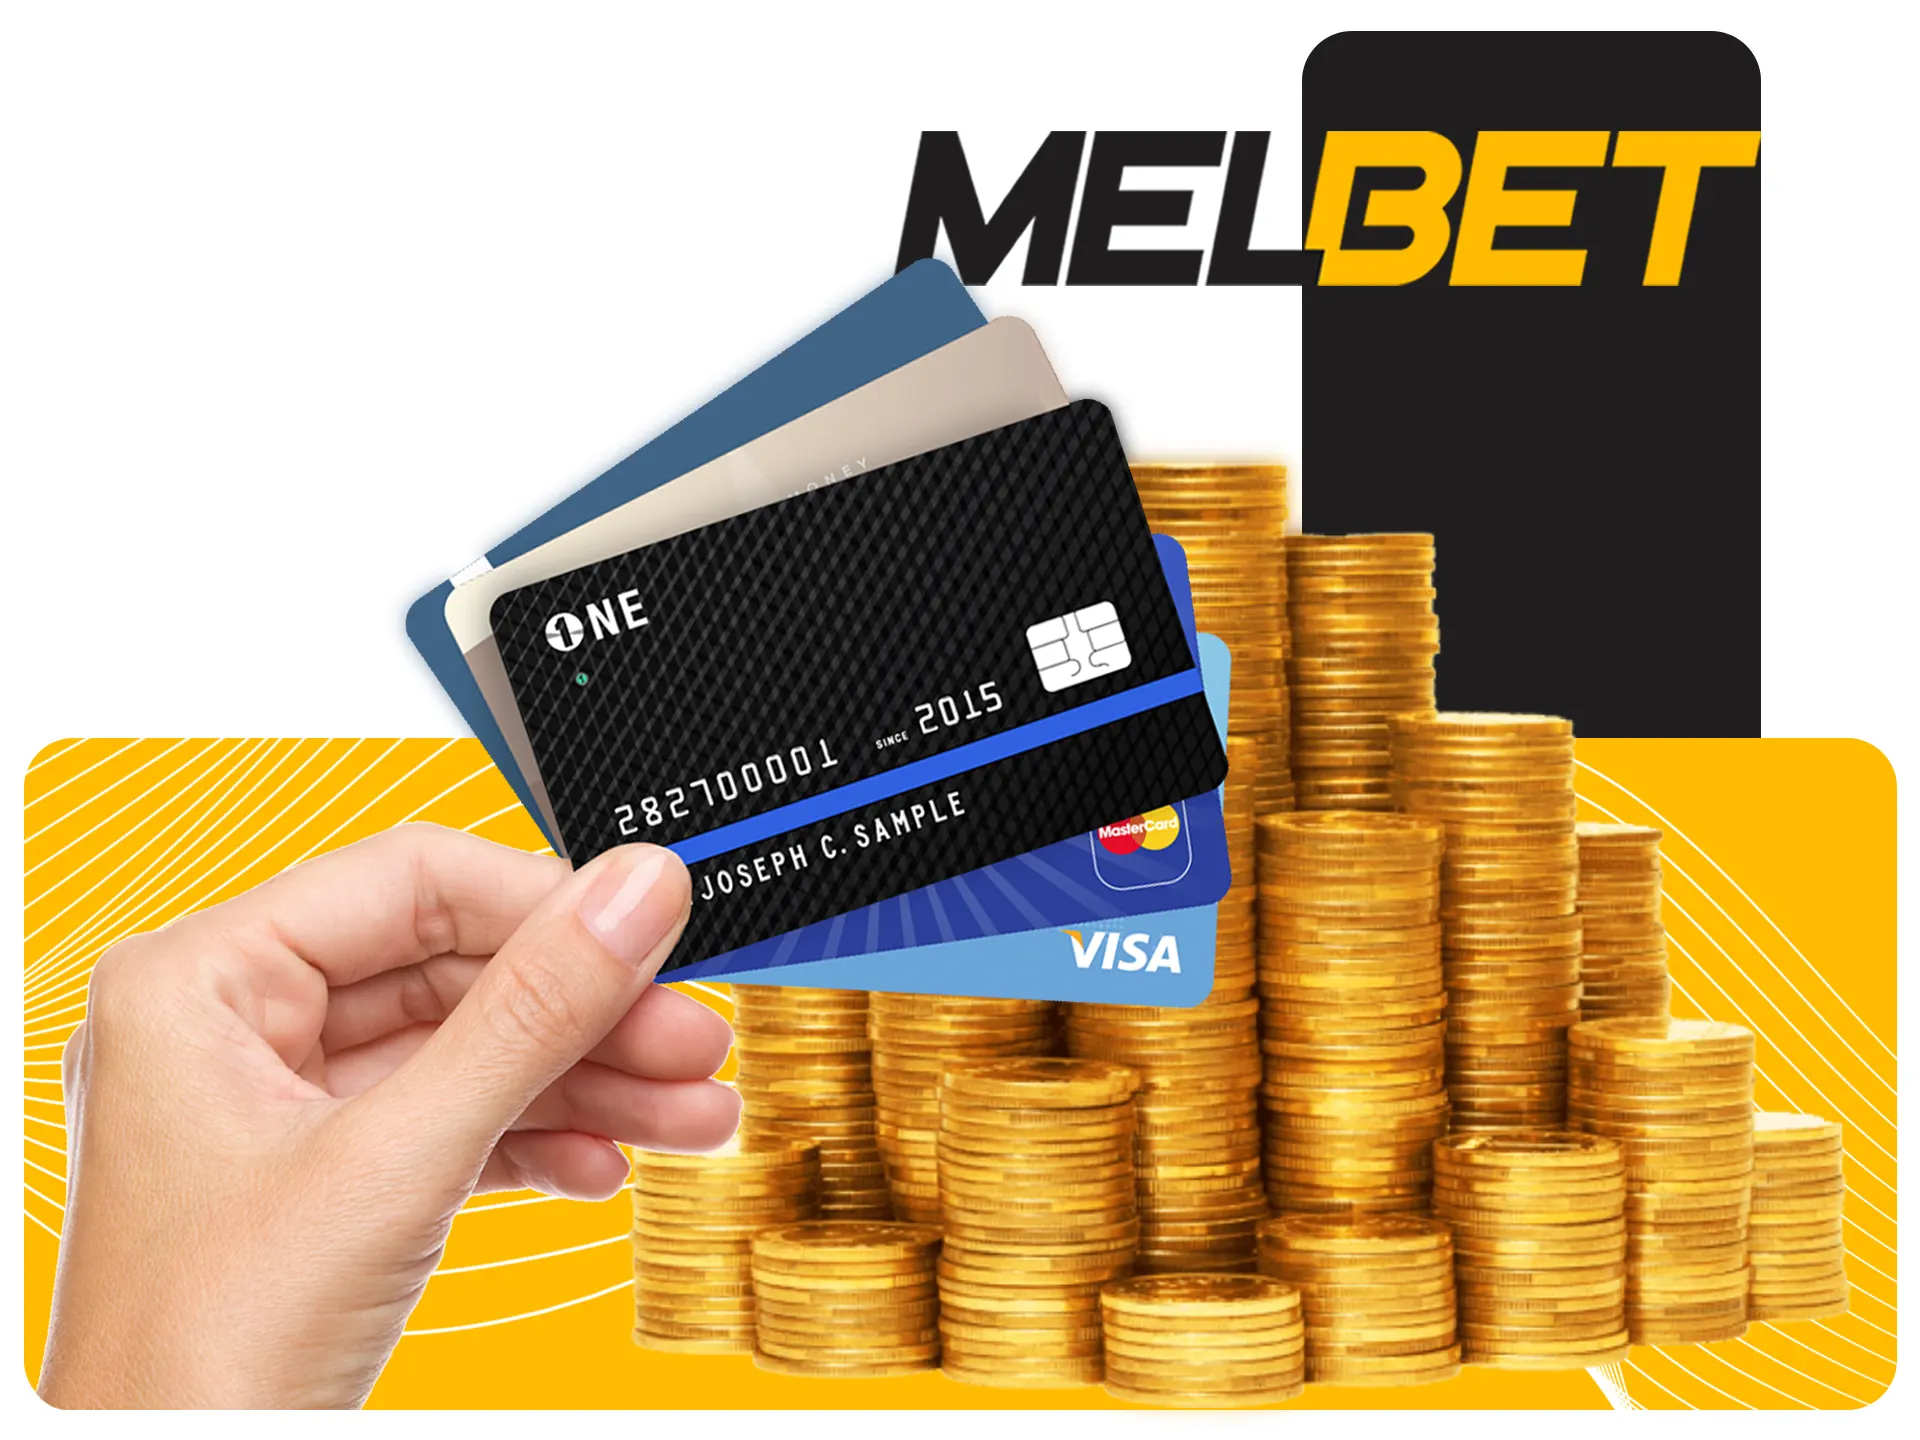 Use your prefered payment method when making deposit at Melbet.